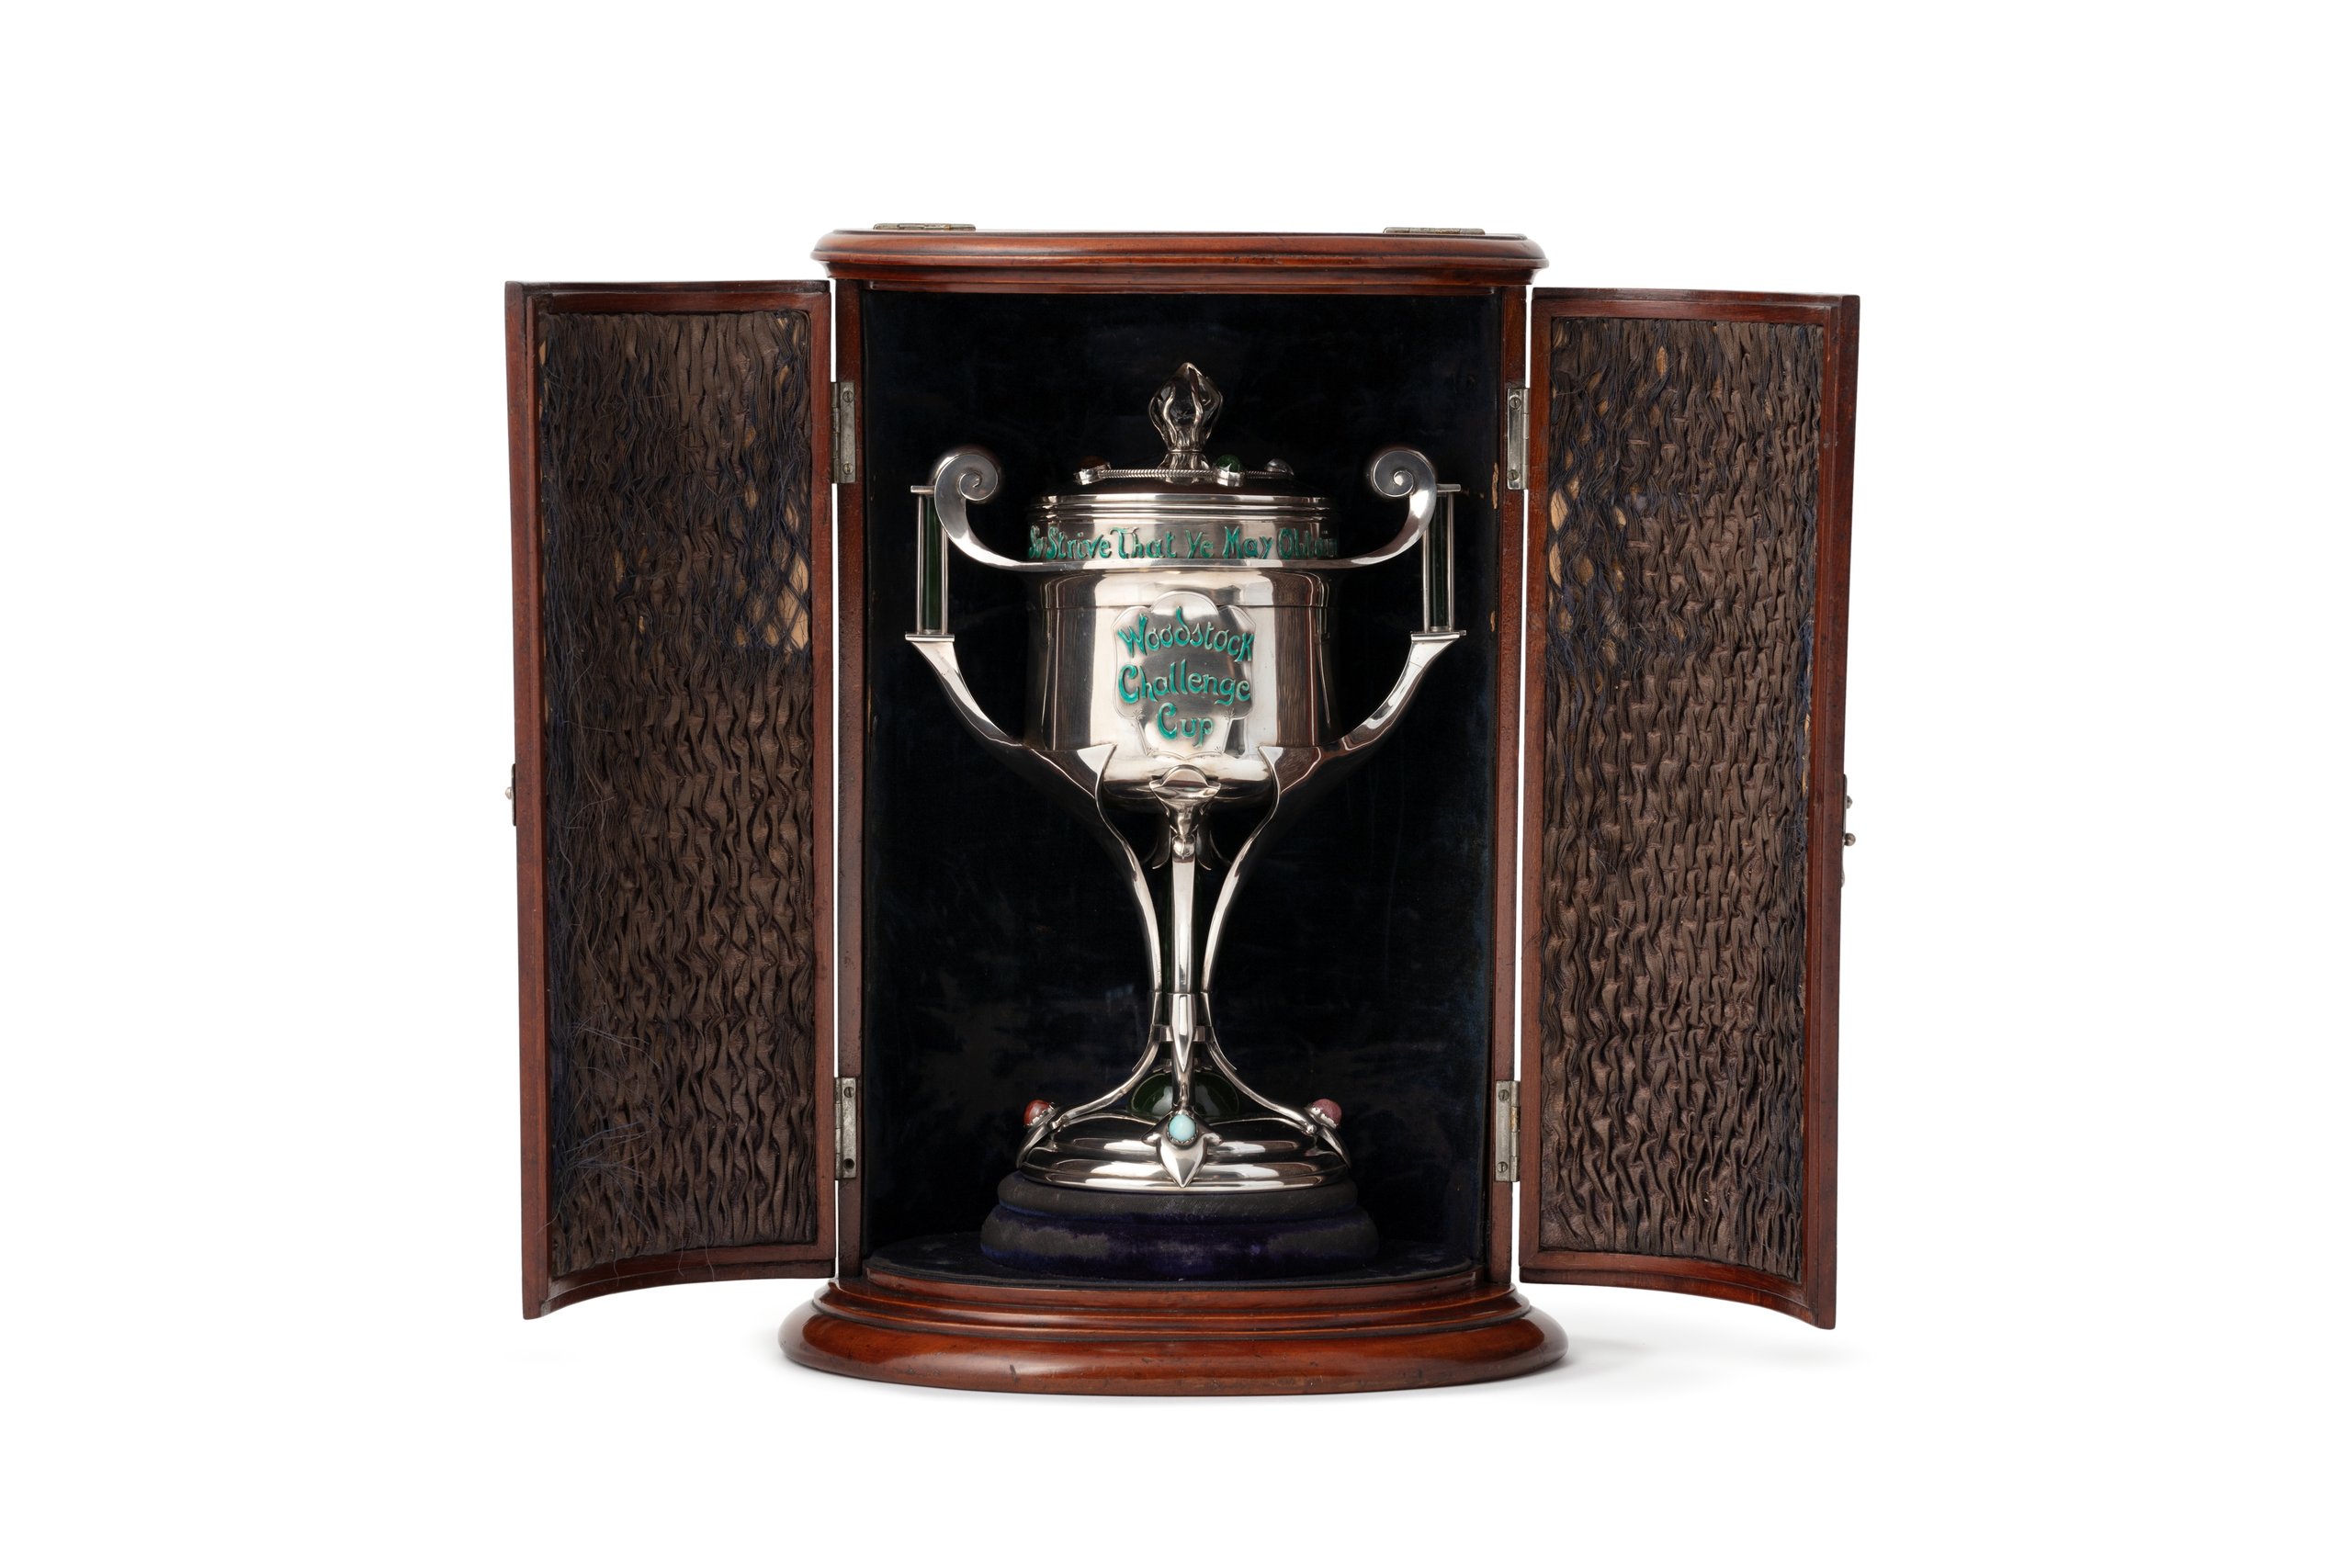 'Woodstock Challenge Cup' by Priora Brothers, Sydney